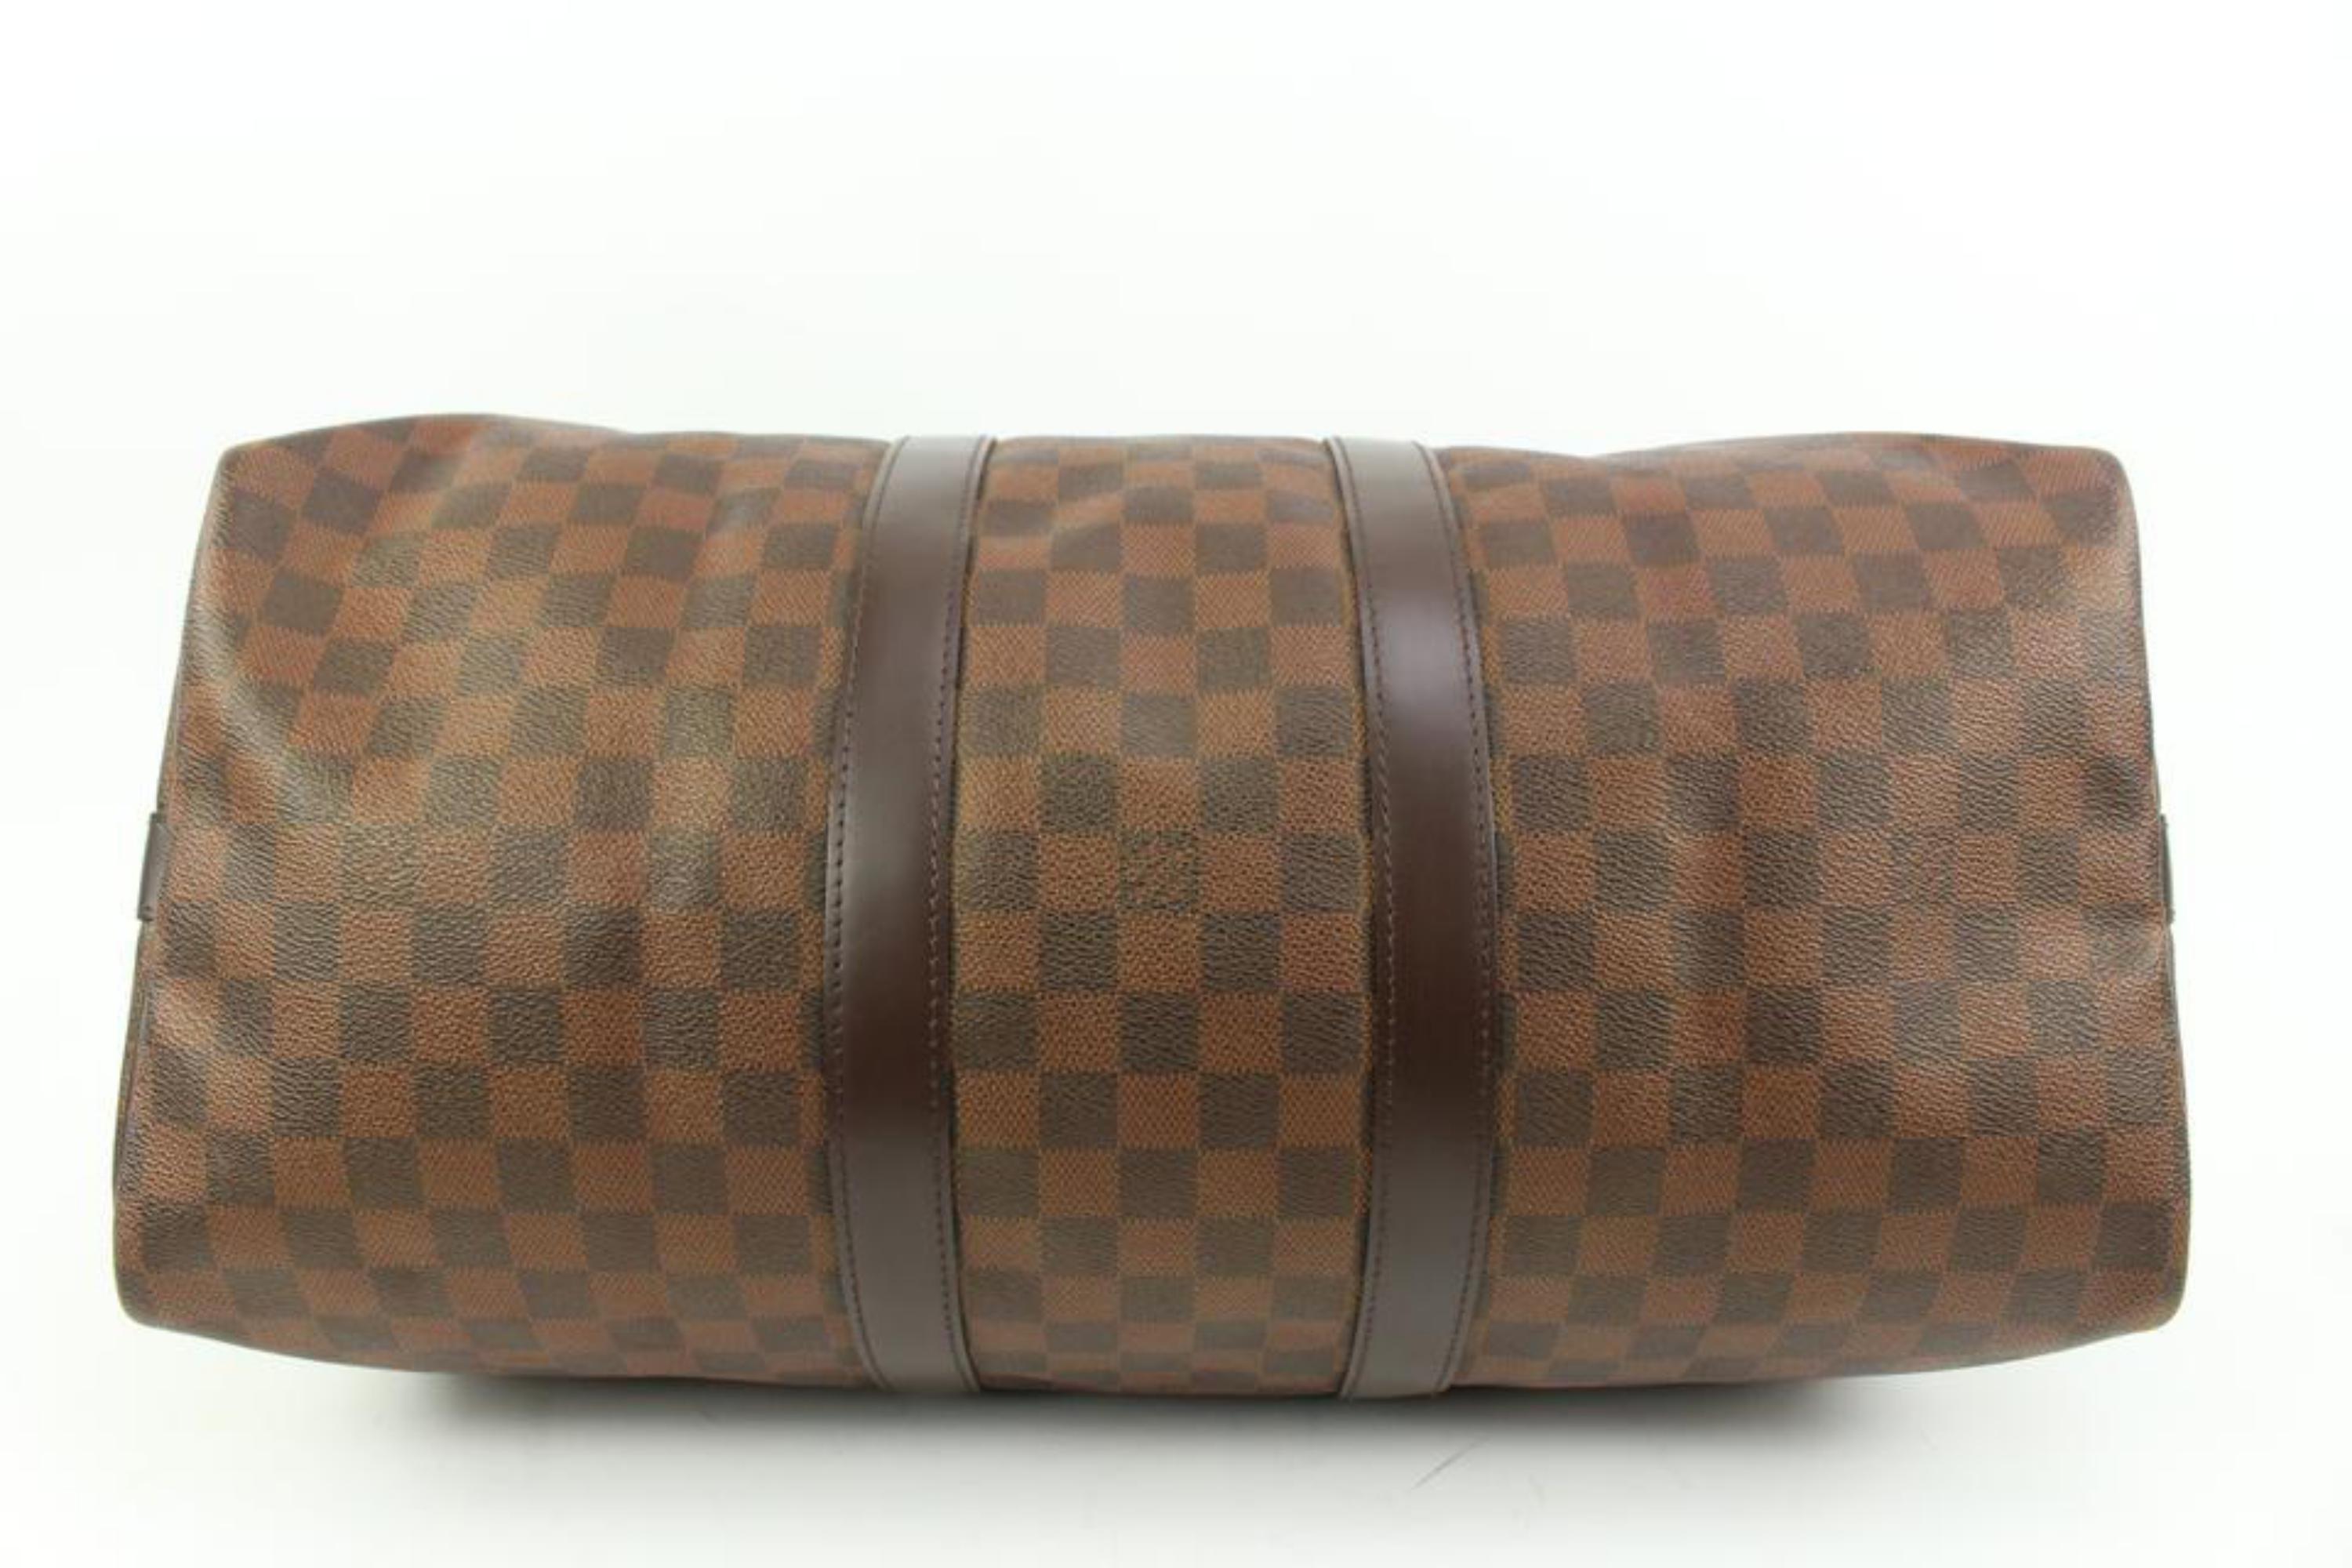 Louis Vuitton Damier Ebene Keepall Bandouliere 45 Duffle Bag with Strap 63lv315s 4